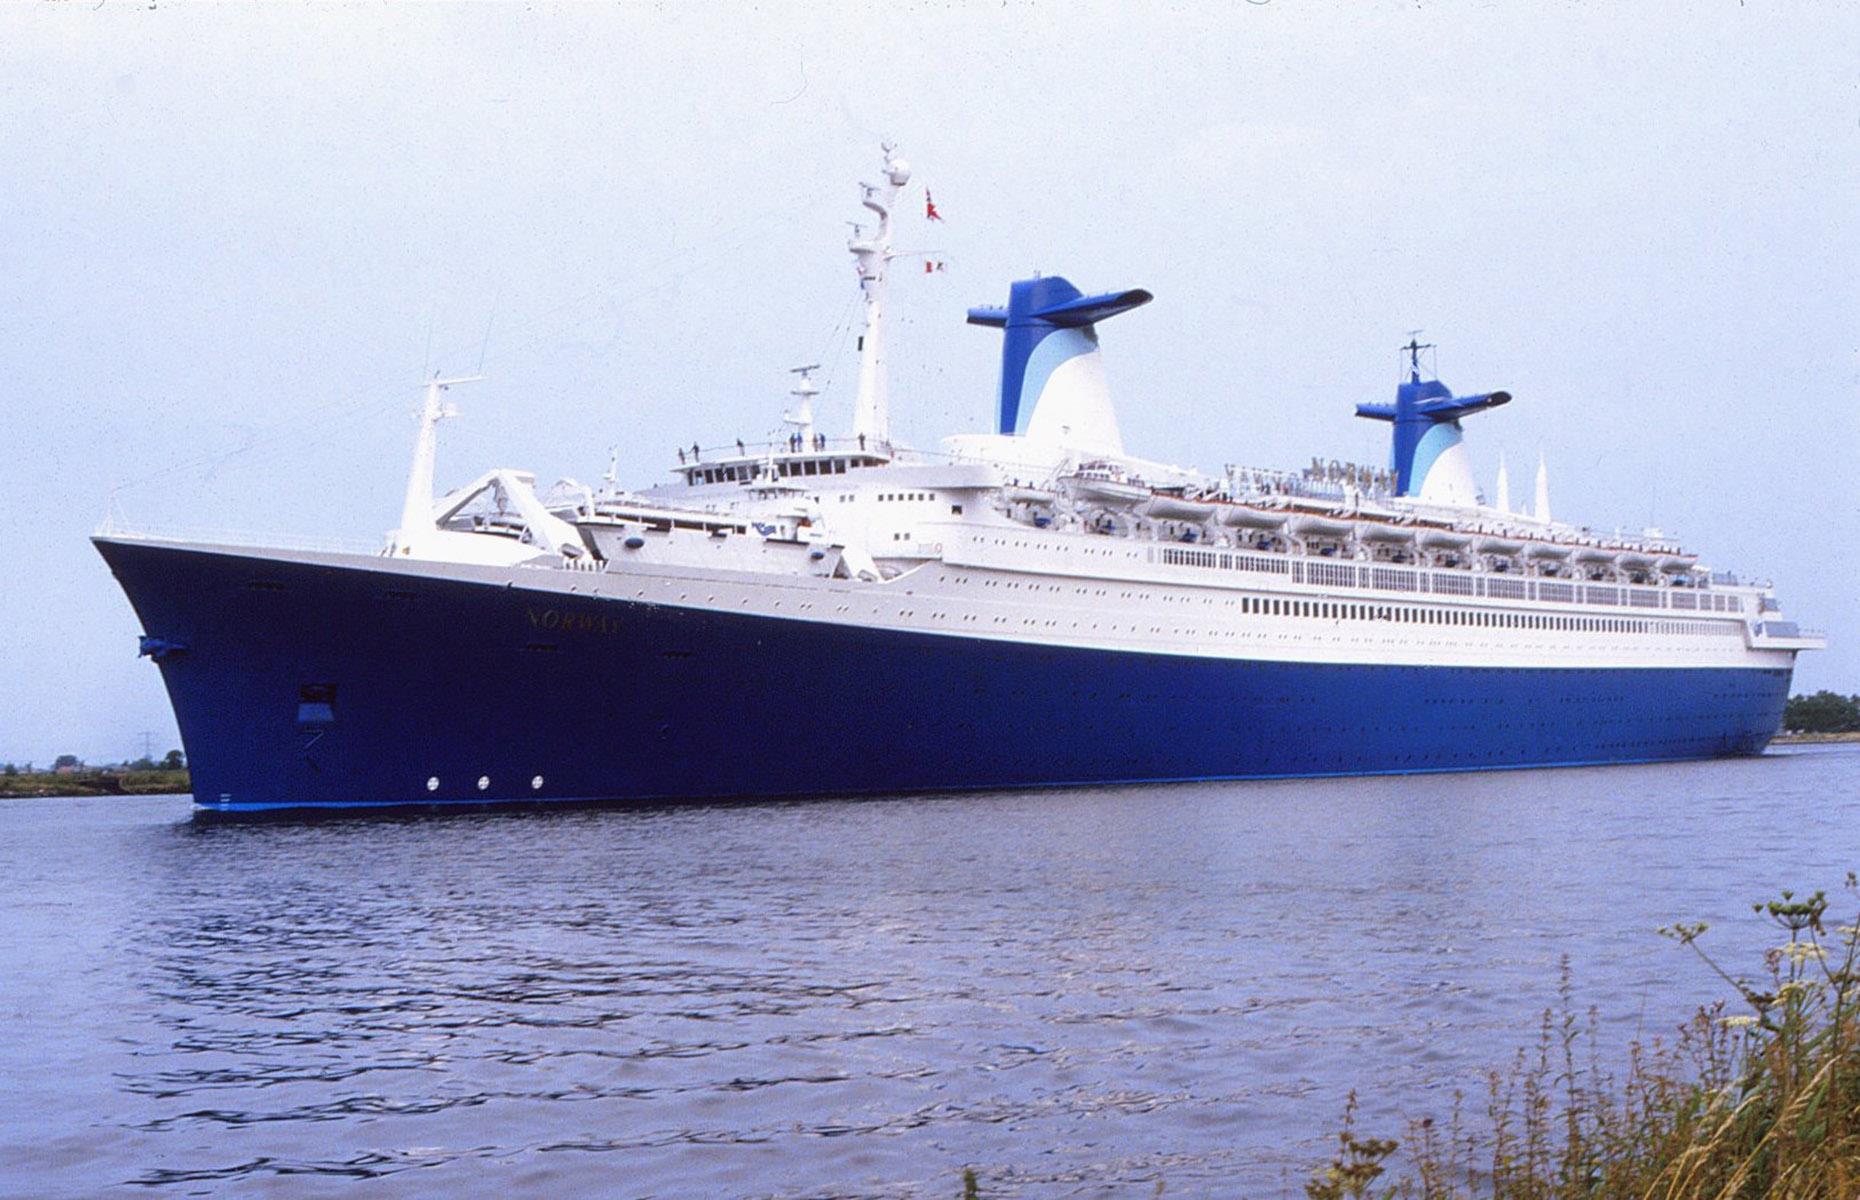 <p>The 1980s is thought to be the decade that pioneered the "cruise to nowhere", where the ship really was the destination. The SS Norway (pictured) – a lavish mega ship with room for thousands of passengers and amenities like a casino – embarked on a no-docking cruise in this decade.</p>  <p><strong><a href="https://www.loveexploring.com/galleries/103600/vacation-on-mars-what-holidays-could-look-like-in-the-future?page=1">This is what vacations could look like in 2050</a></strong></p>